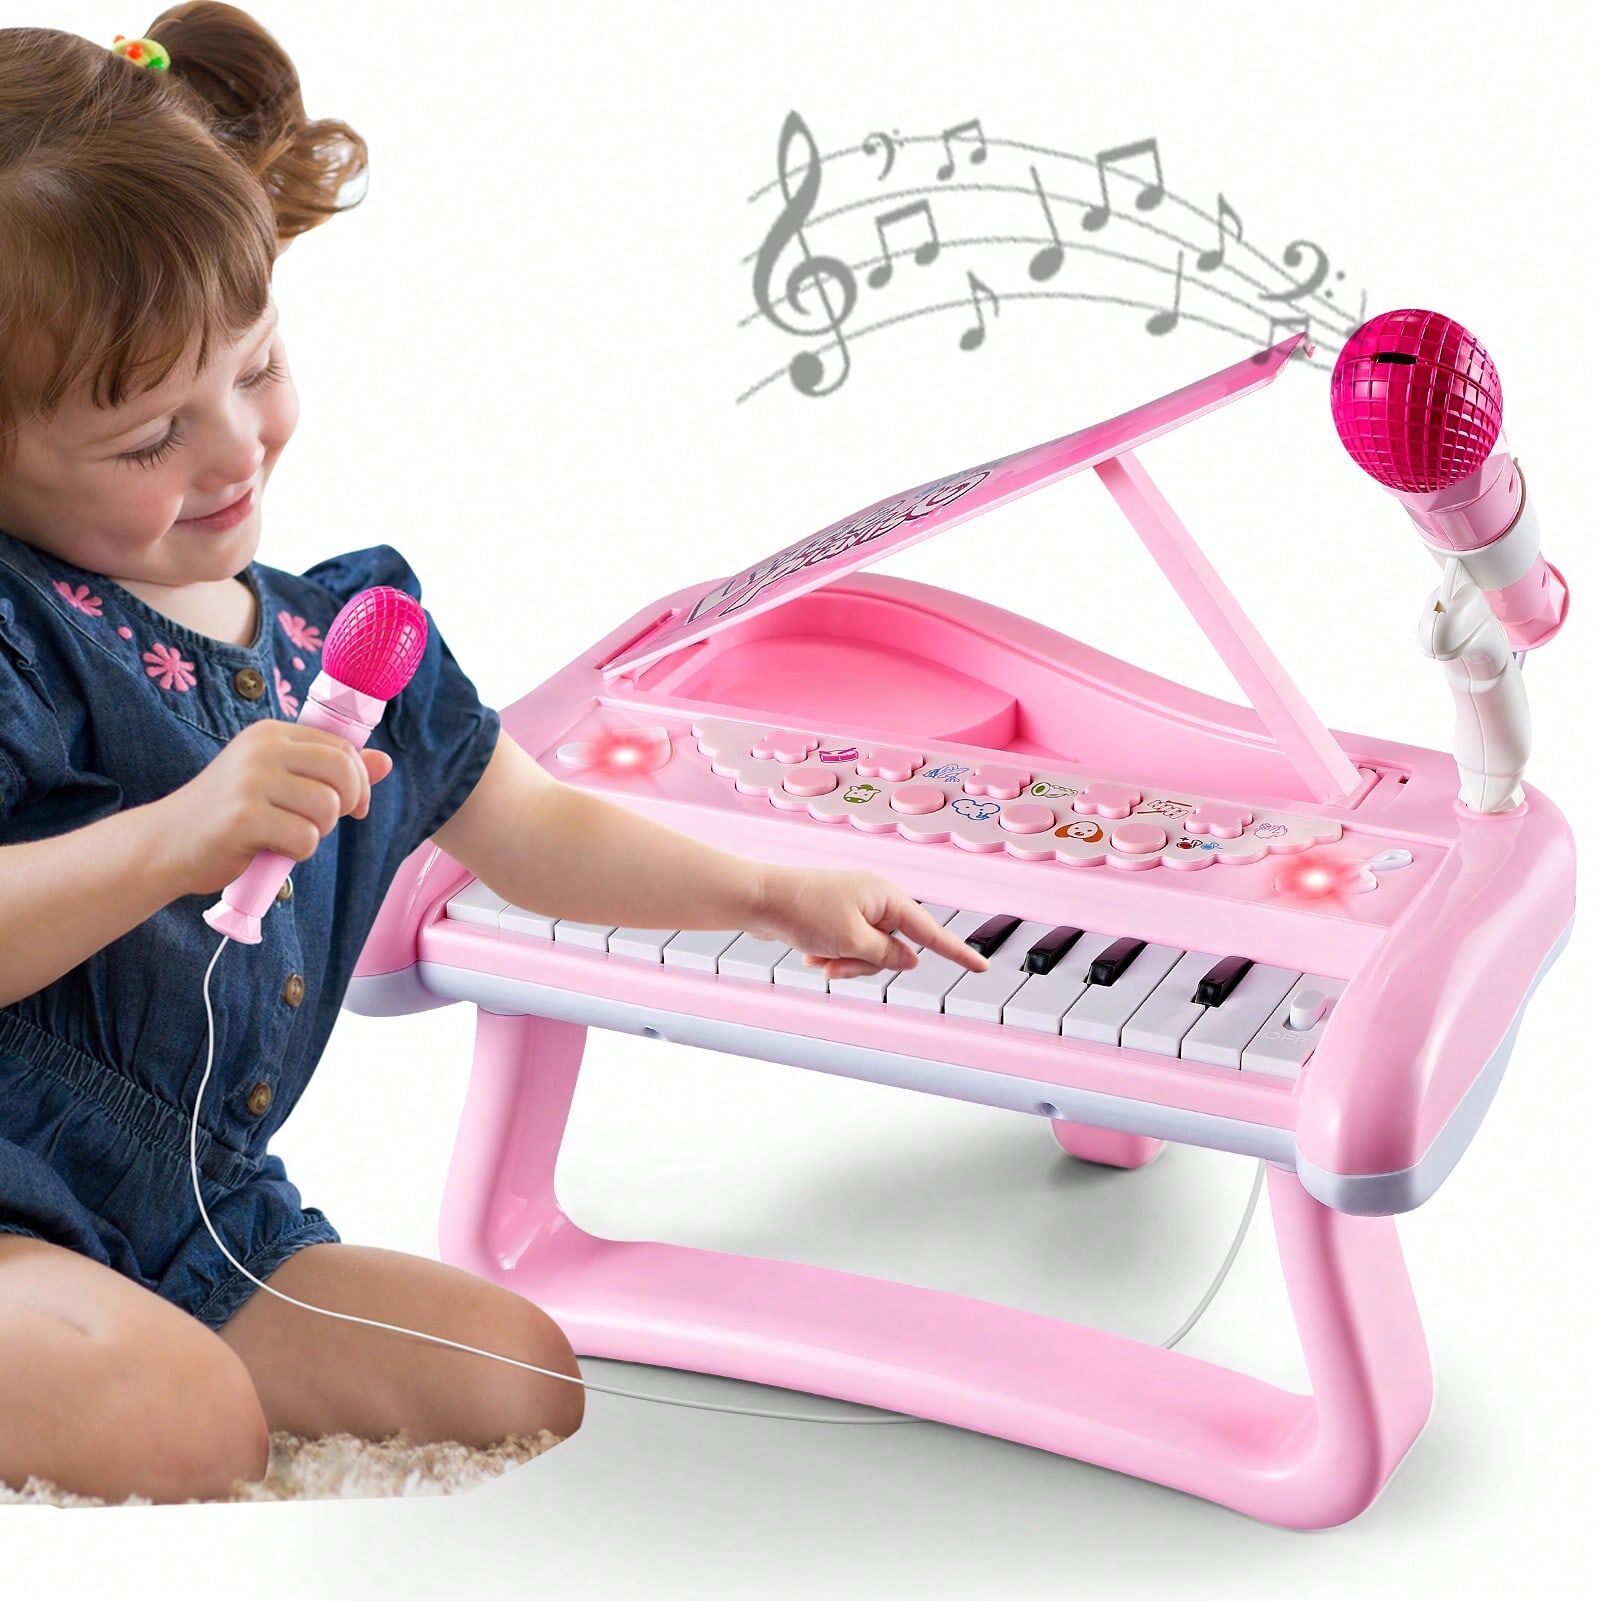 SHEIN First Birthday Toddler Piano Toys For 1 Year Old Girls, Baby Musical Keyboard 22 Keys Kids Age 1 2 3 Play Instrument With Microphone Pink Pink